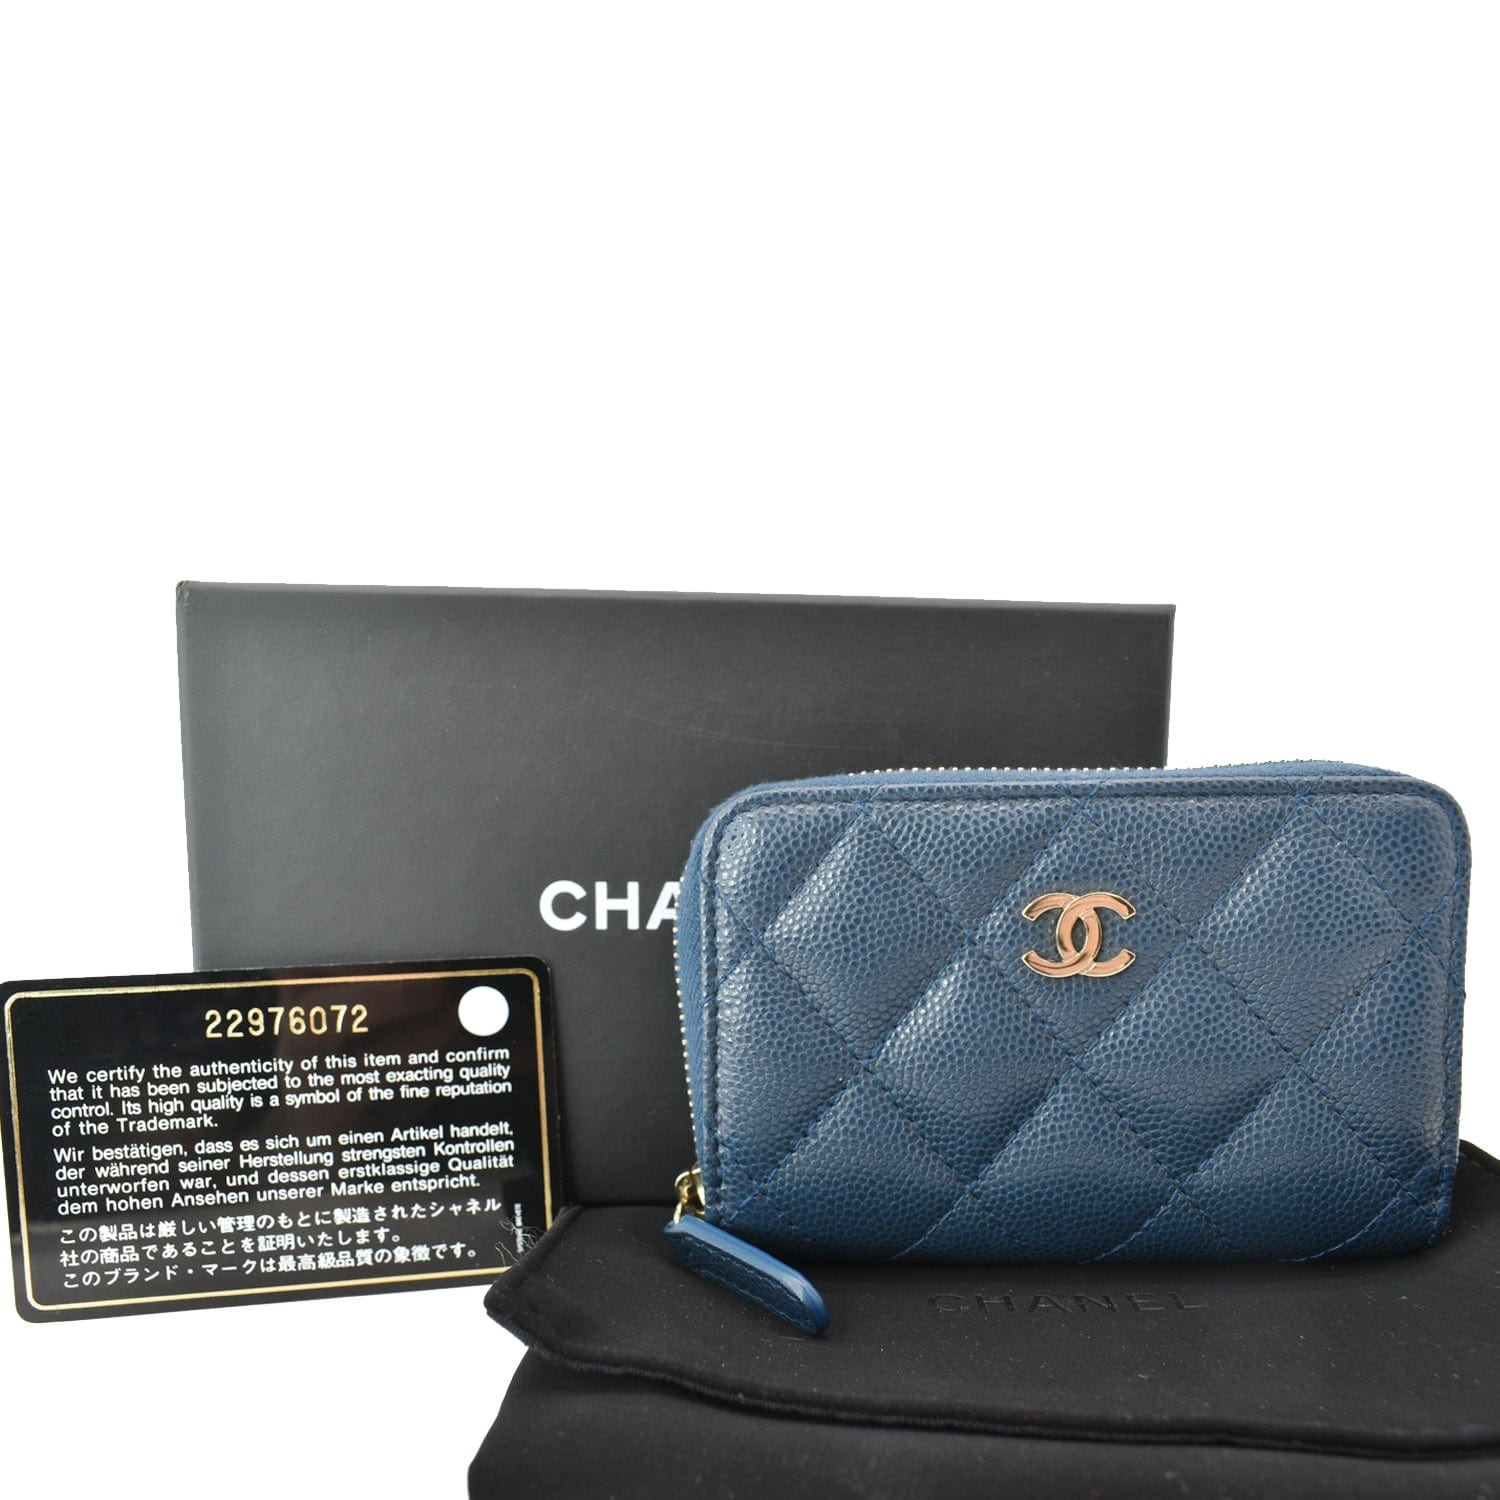 CHANEL, Bags, Chanel Classic Zipped Coin Purse Iridescent Blue